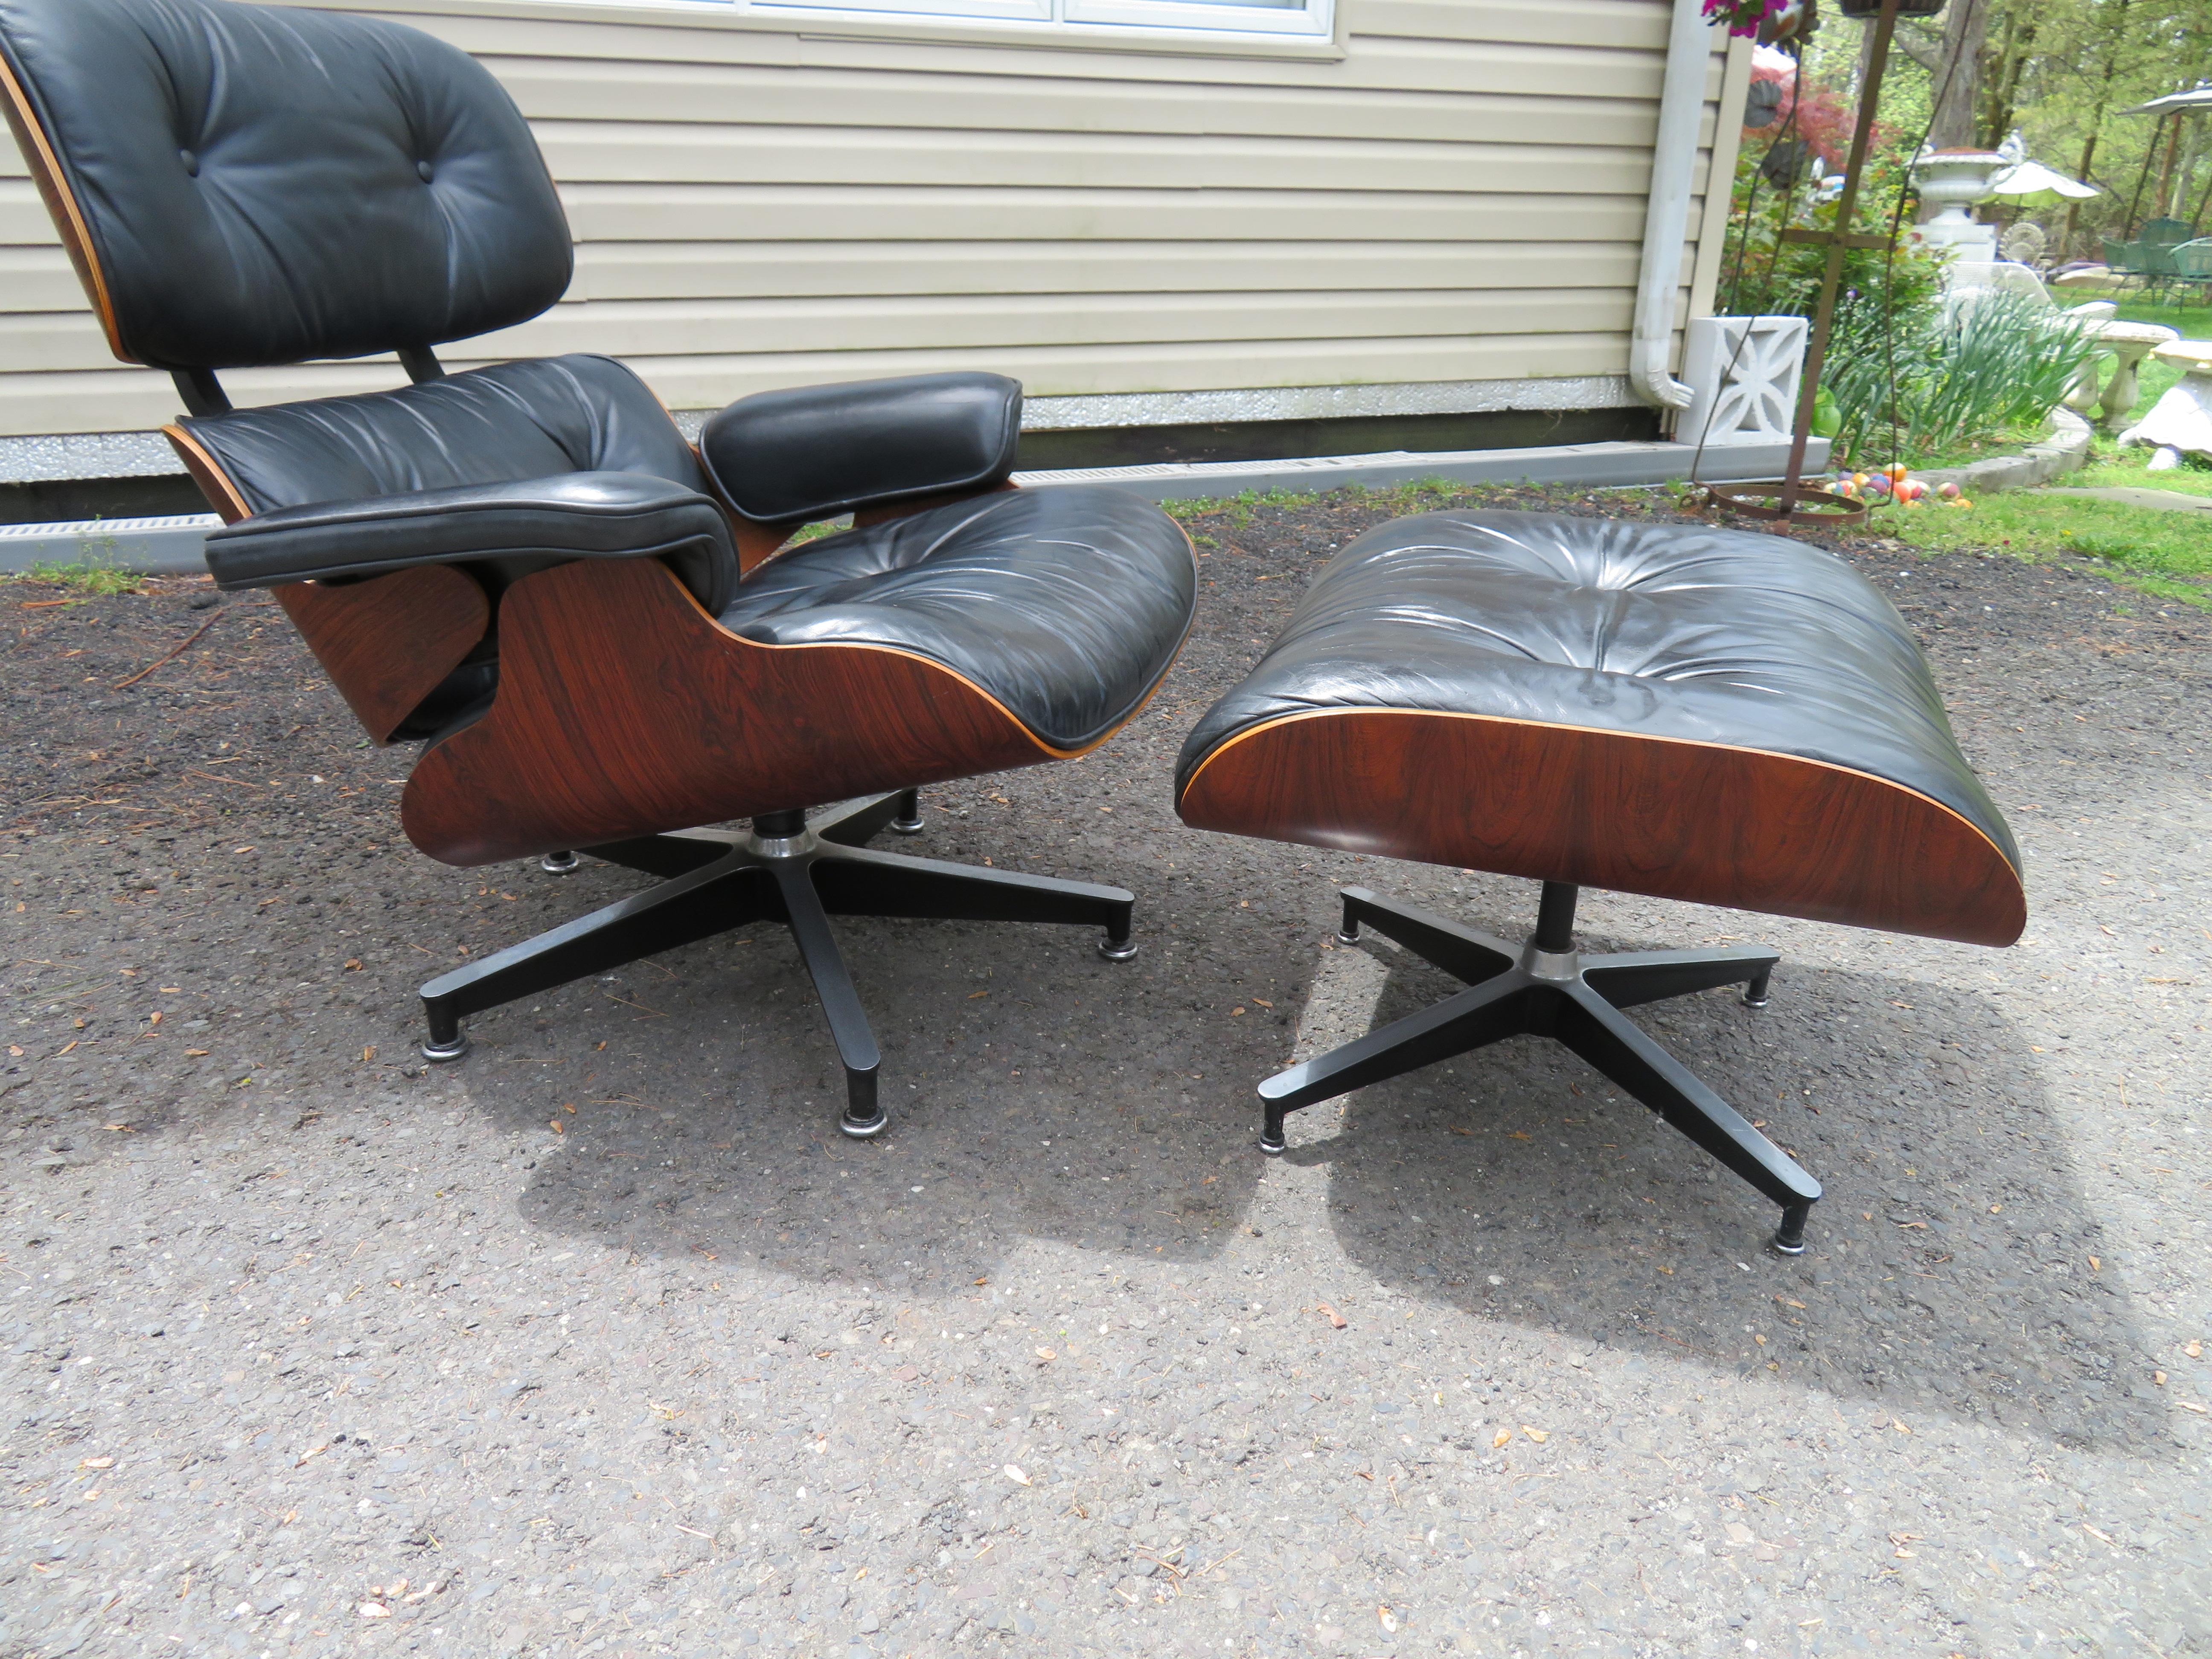 A very clean example of a vintage modern icon. Charles Eames 670 & 671 Lounge chair and an ottoman produced by Herman Miller. Beautiful striations in the Brazilian Rosewood graining. A great example and yes, they are as comfortable as they look.